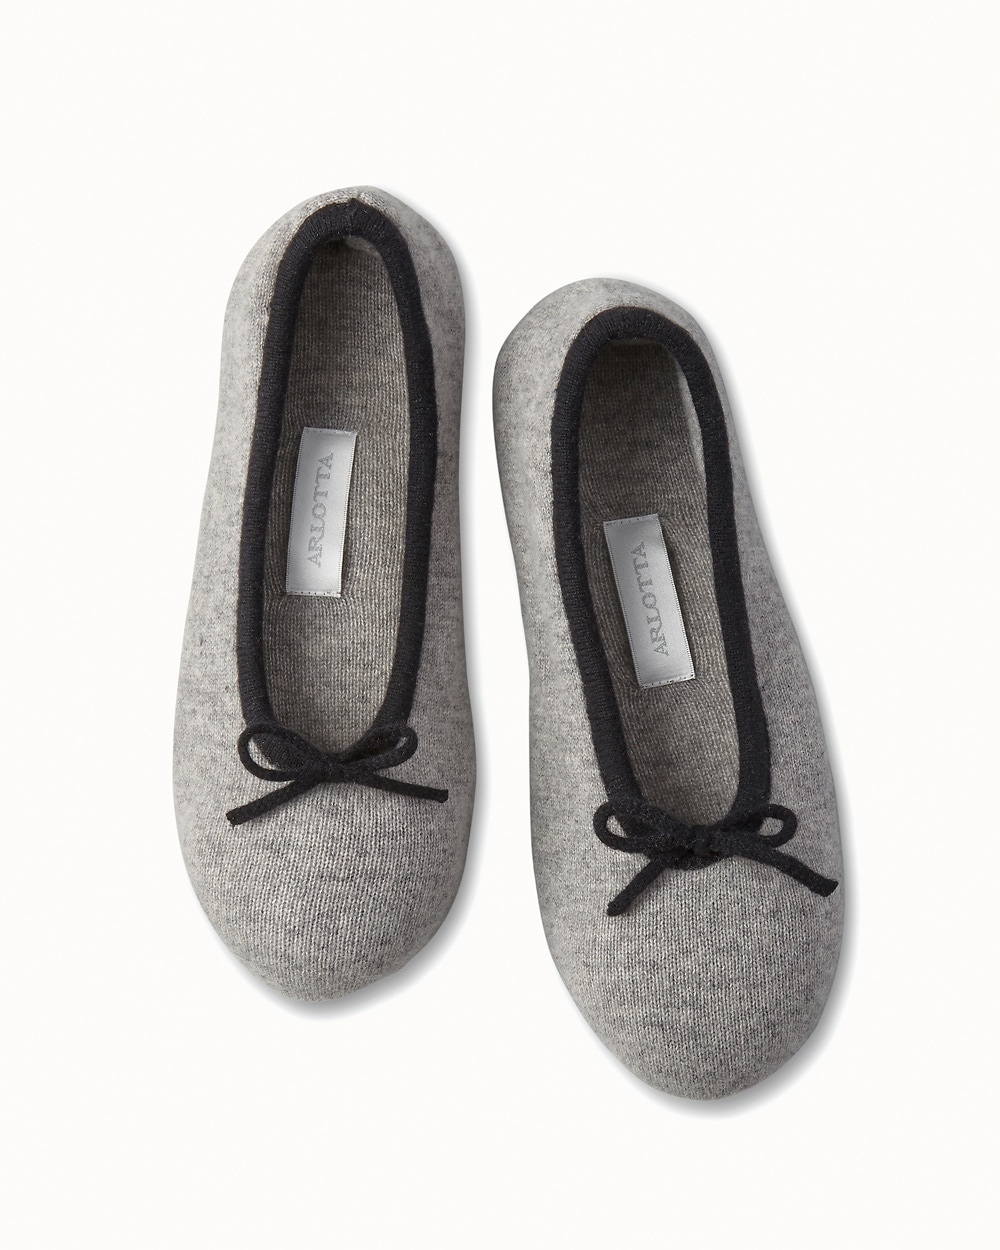 Arlotta Drawcord Cashmere Slippers Heather Grey And Black